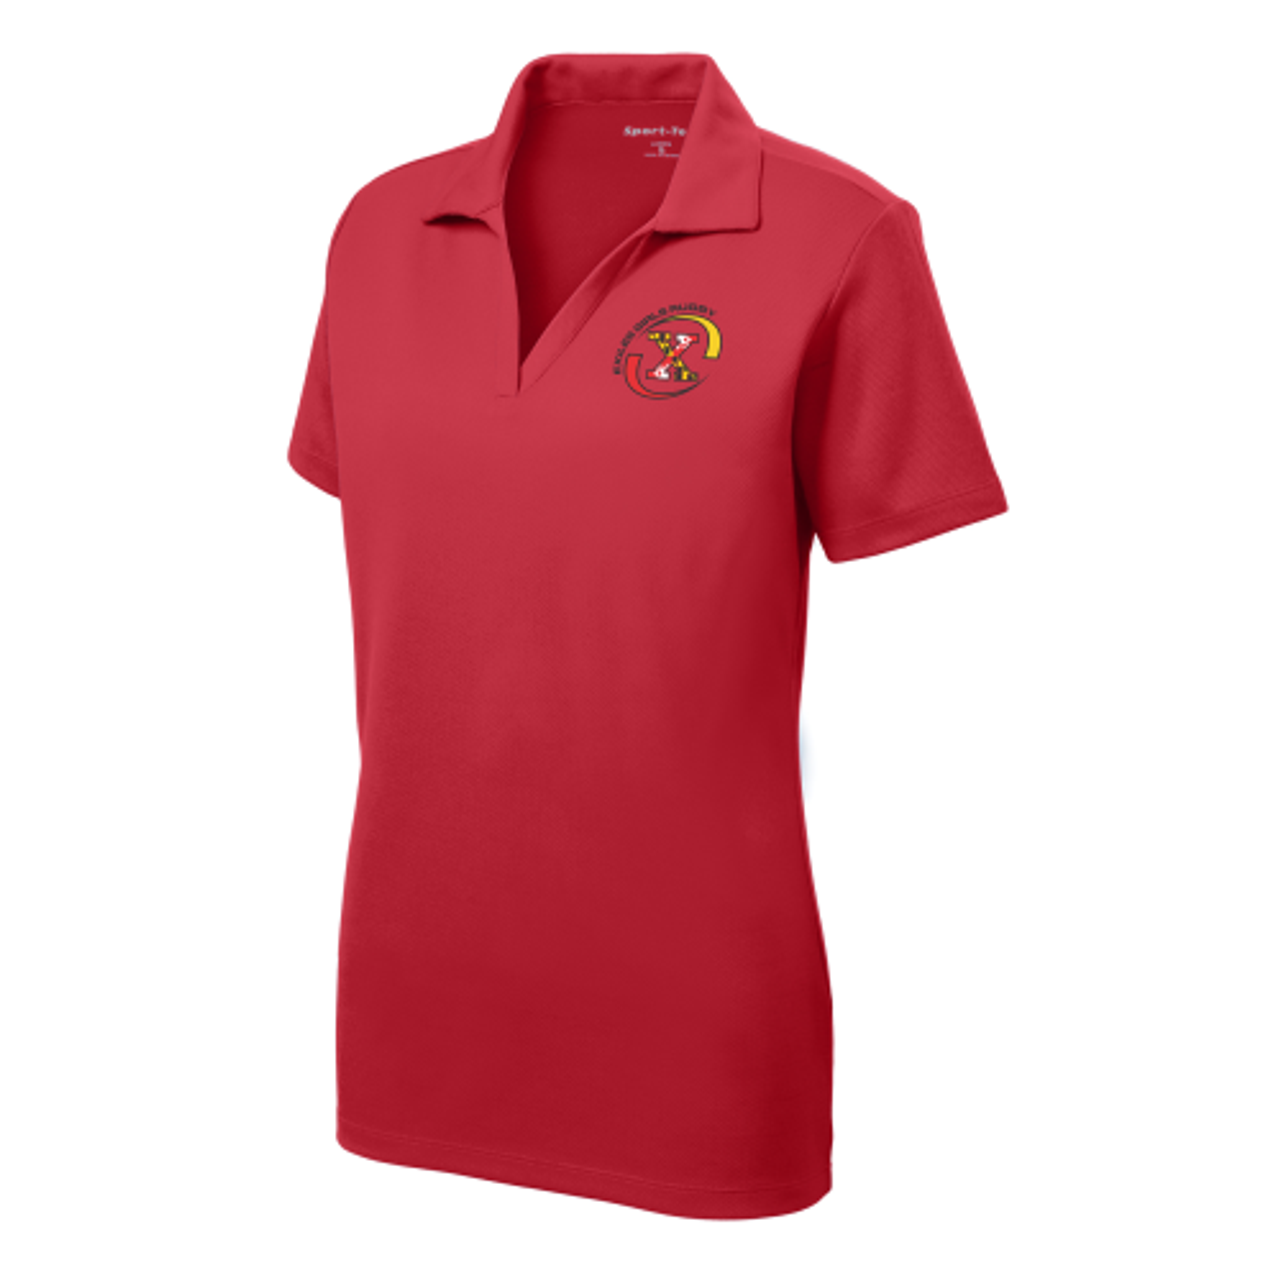 Maryland Exiles Girls Performance Polo, Red